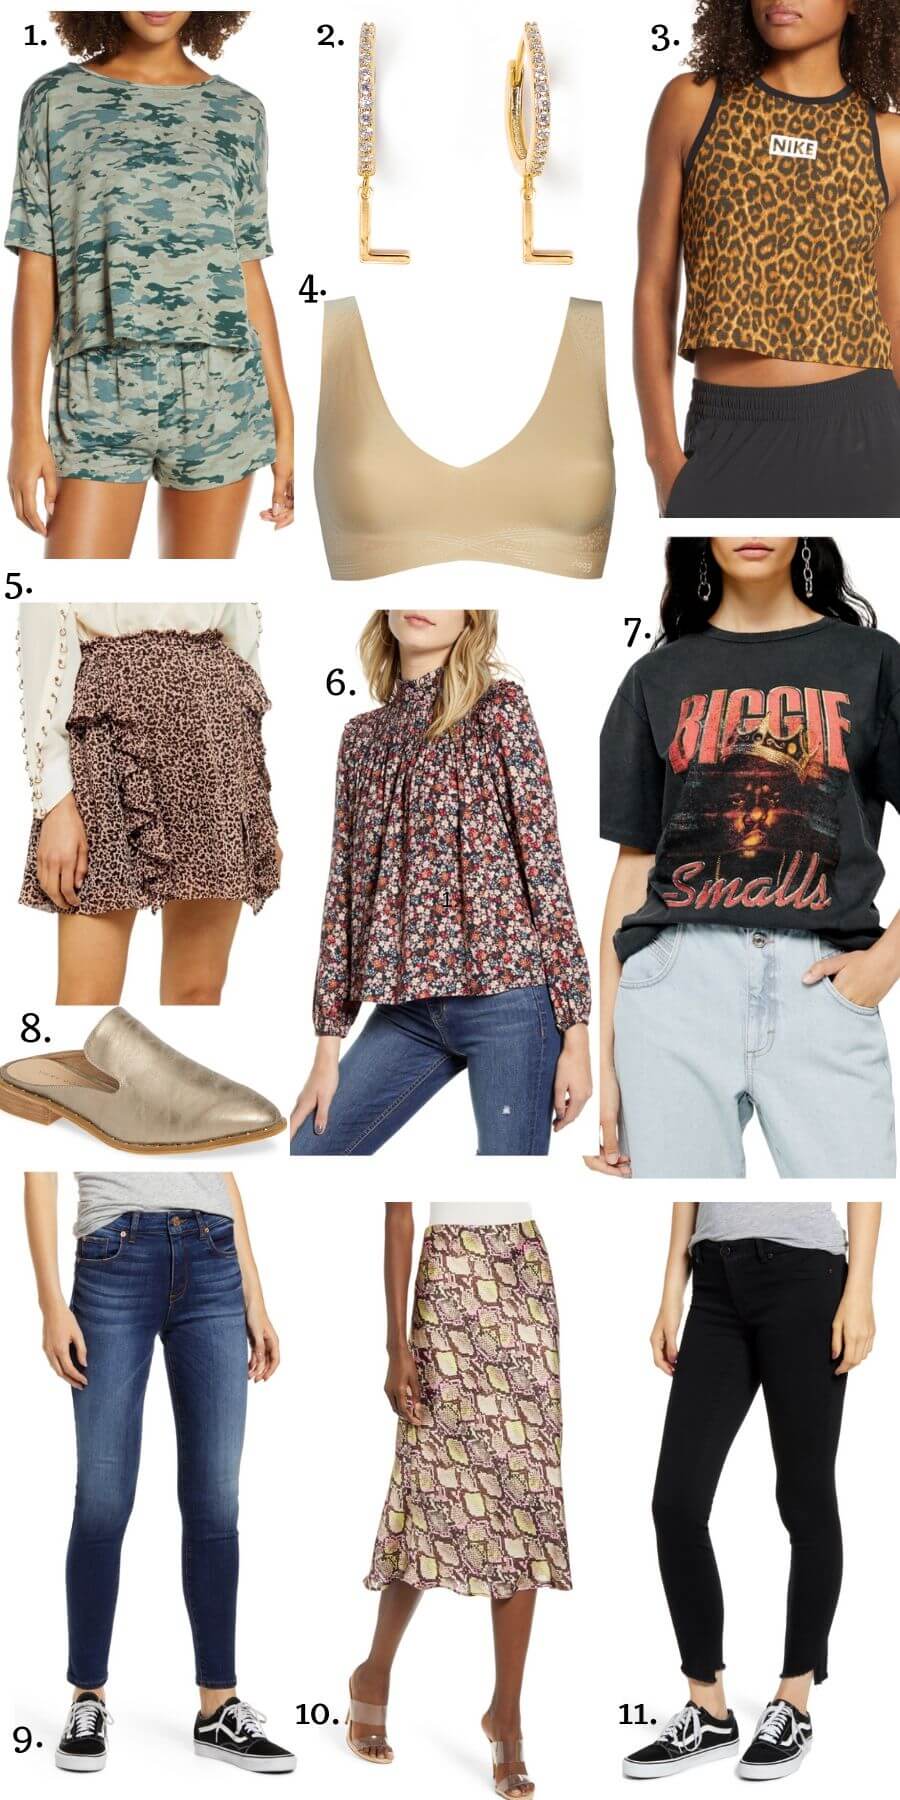 New arrivals from Nordstrom Under $50